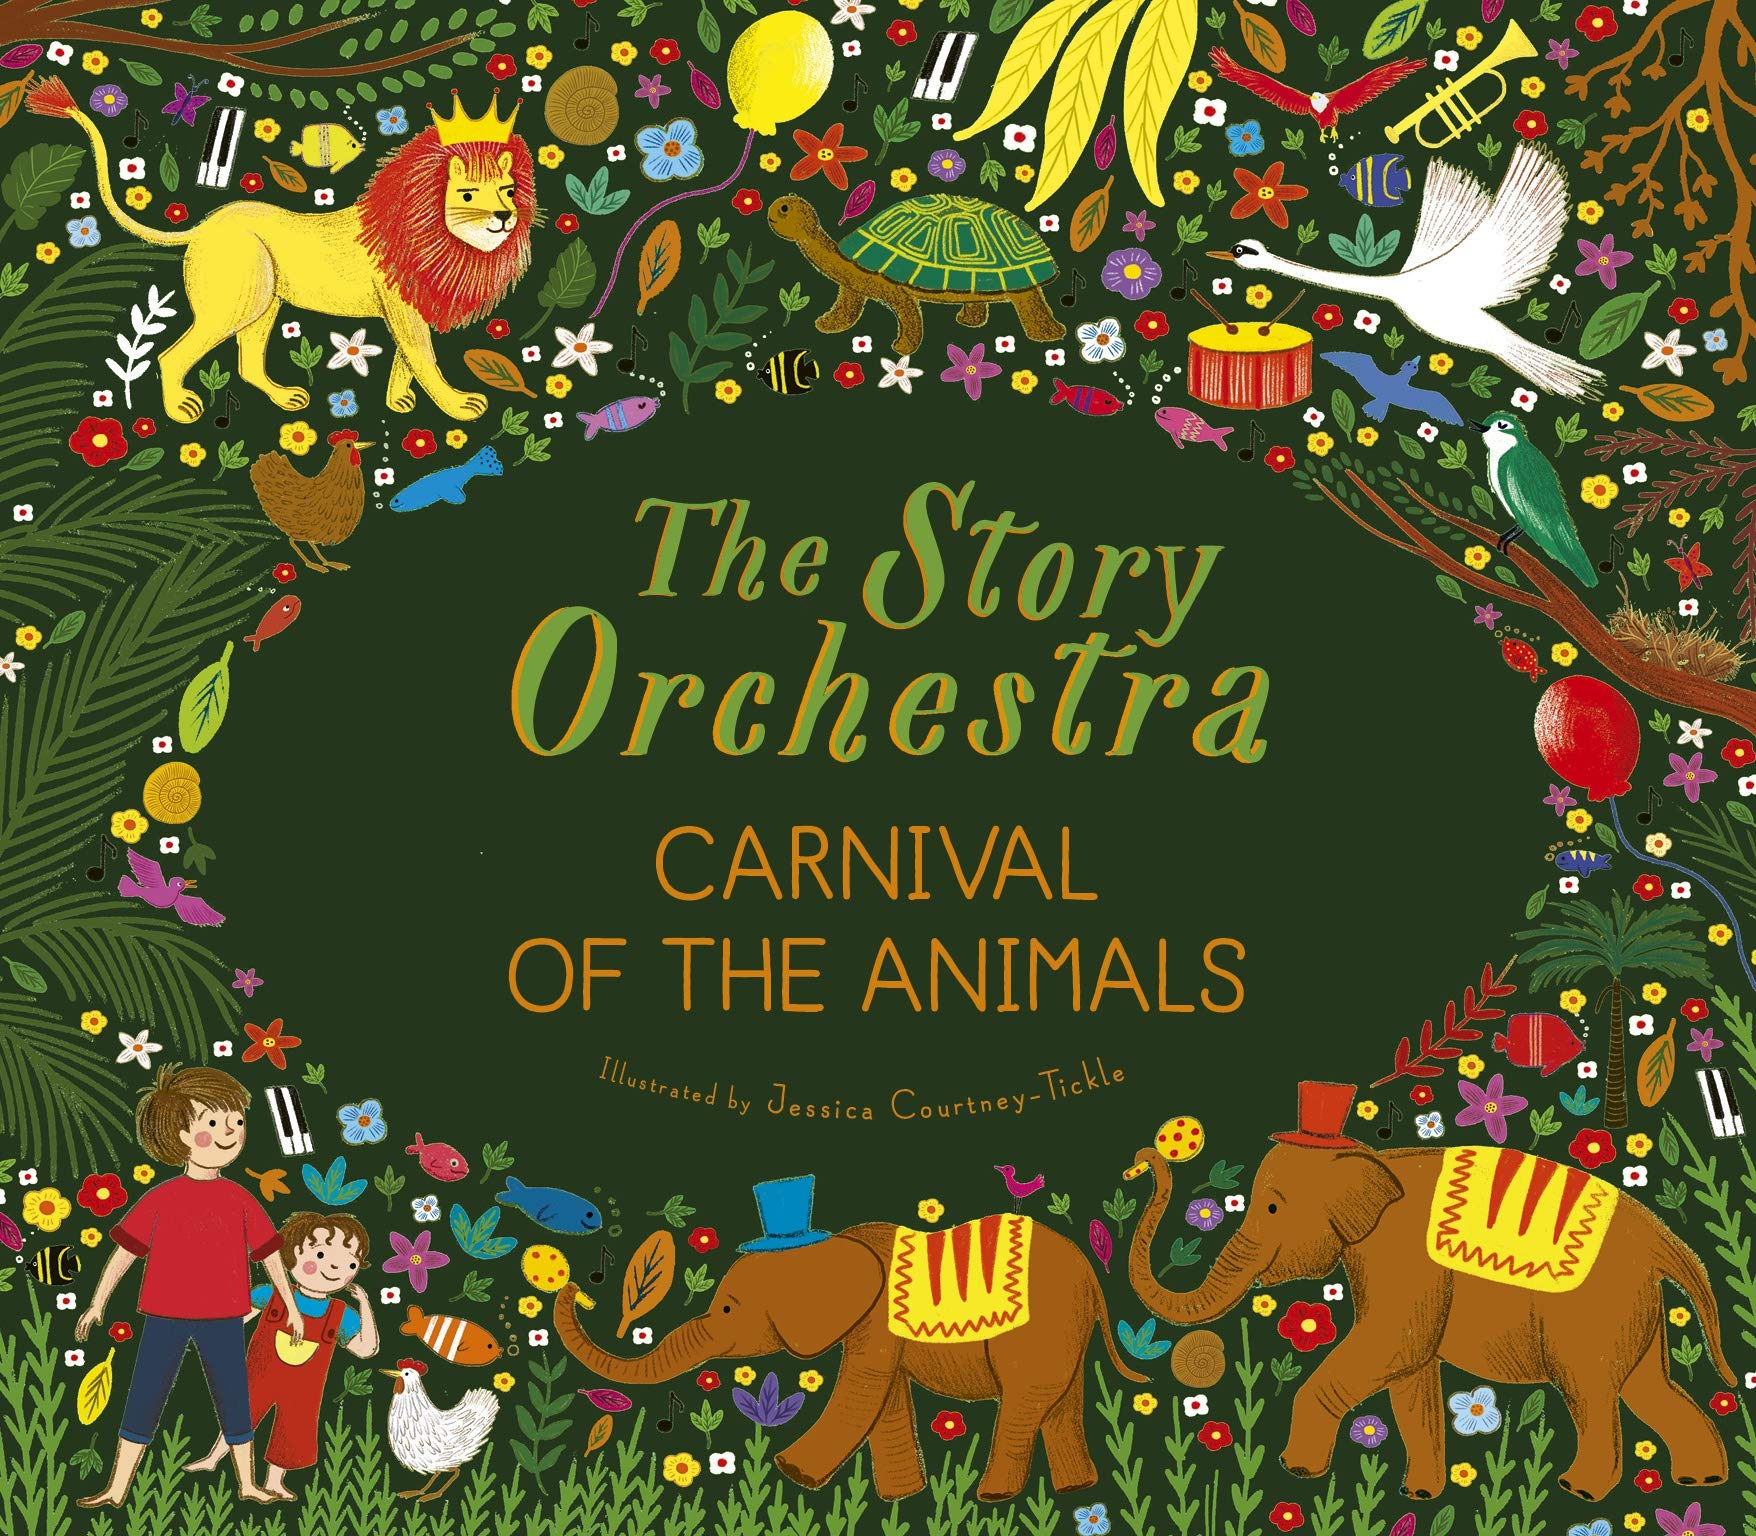 Carnival of the Animals (Story Orchestra)